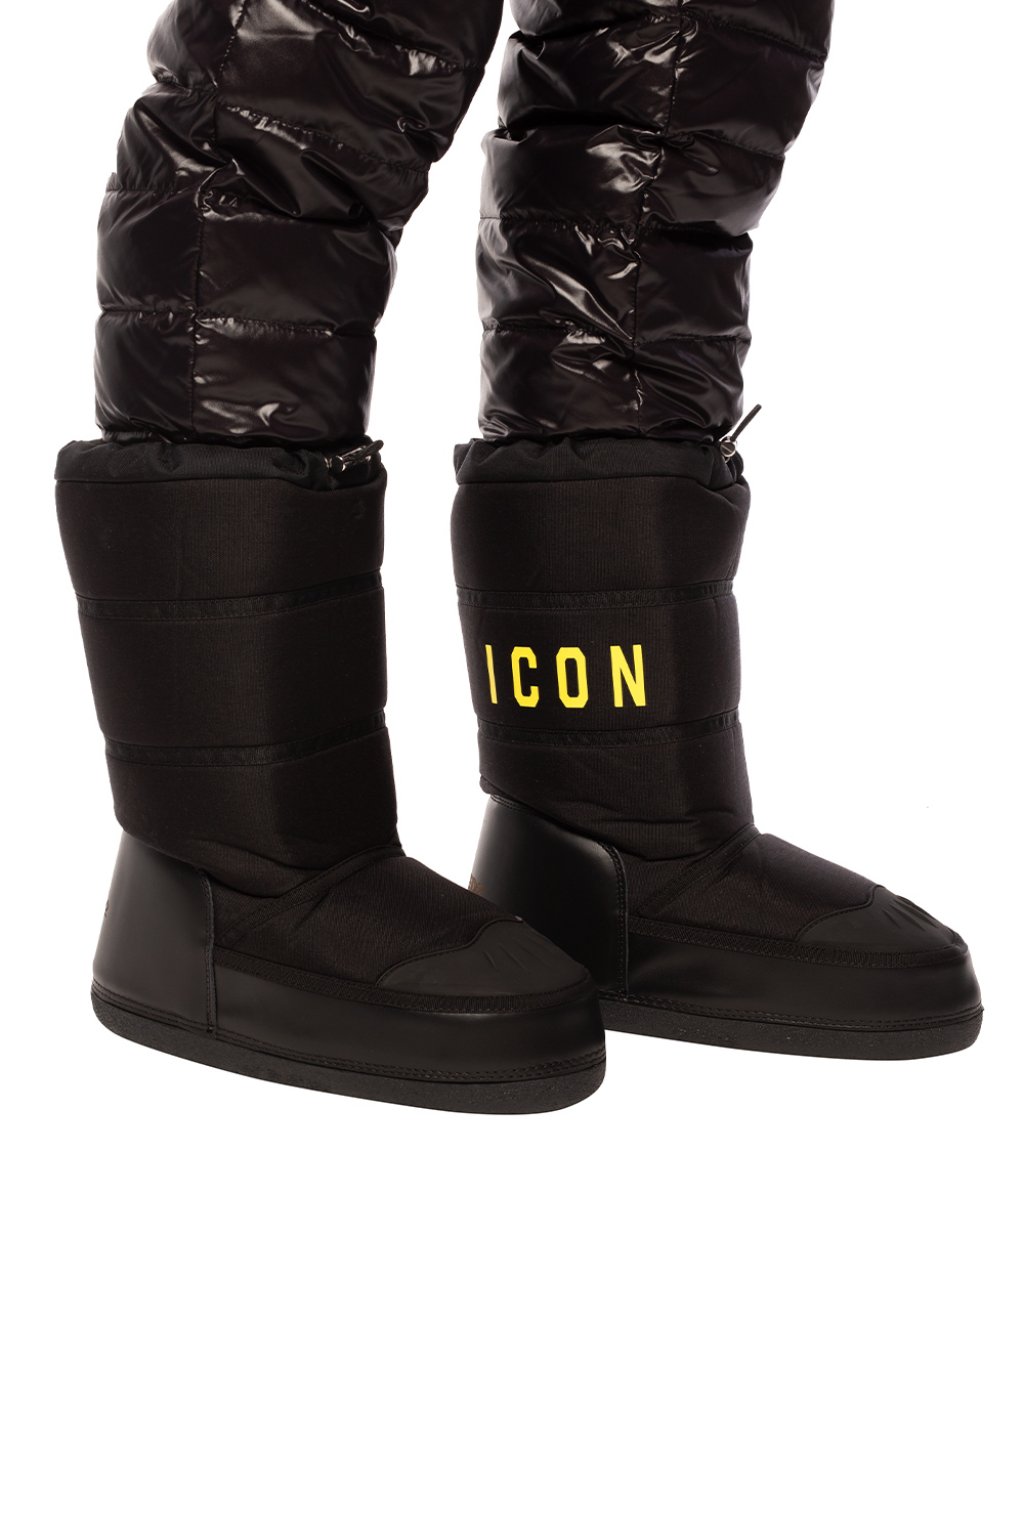 Dsquared2 ‘Icon’ moon boots